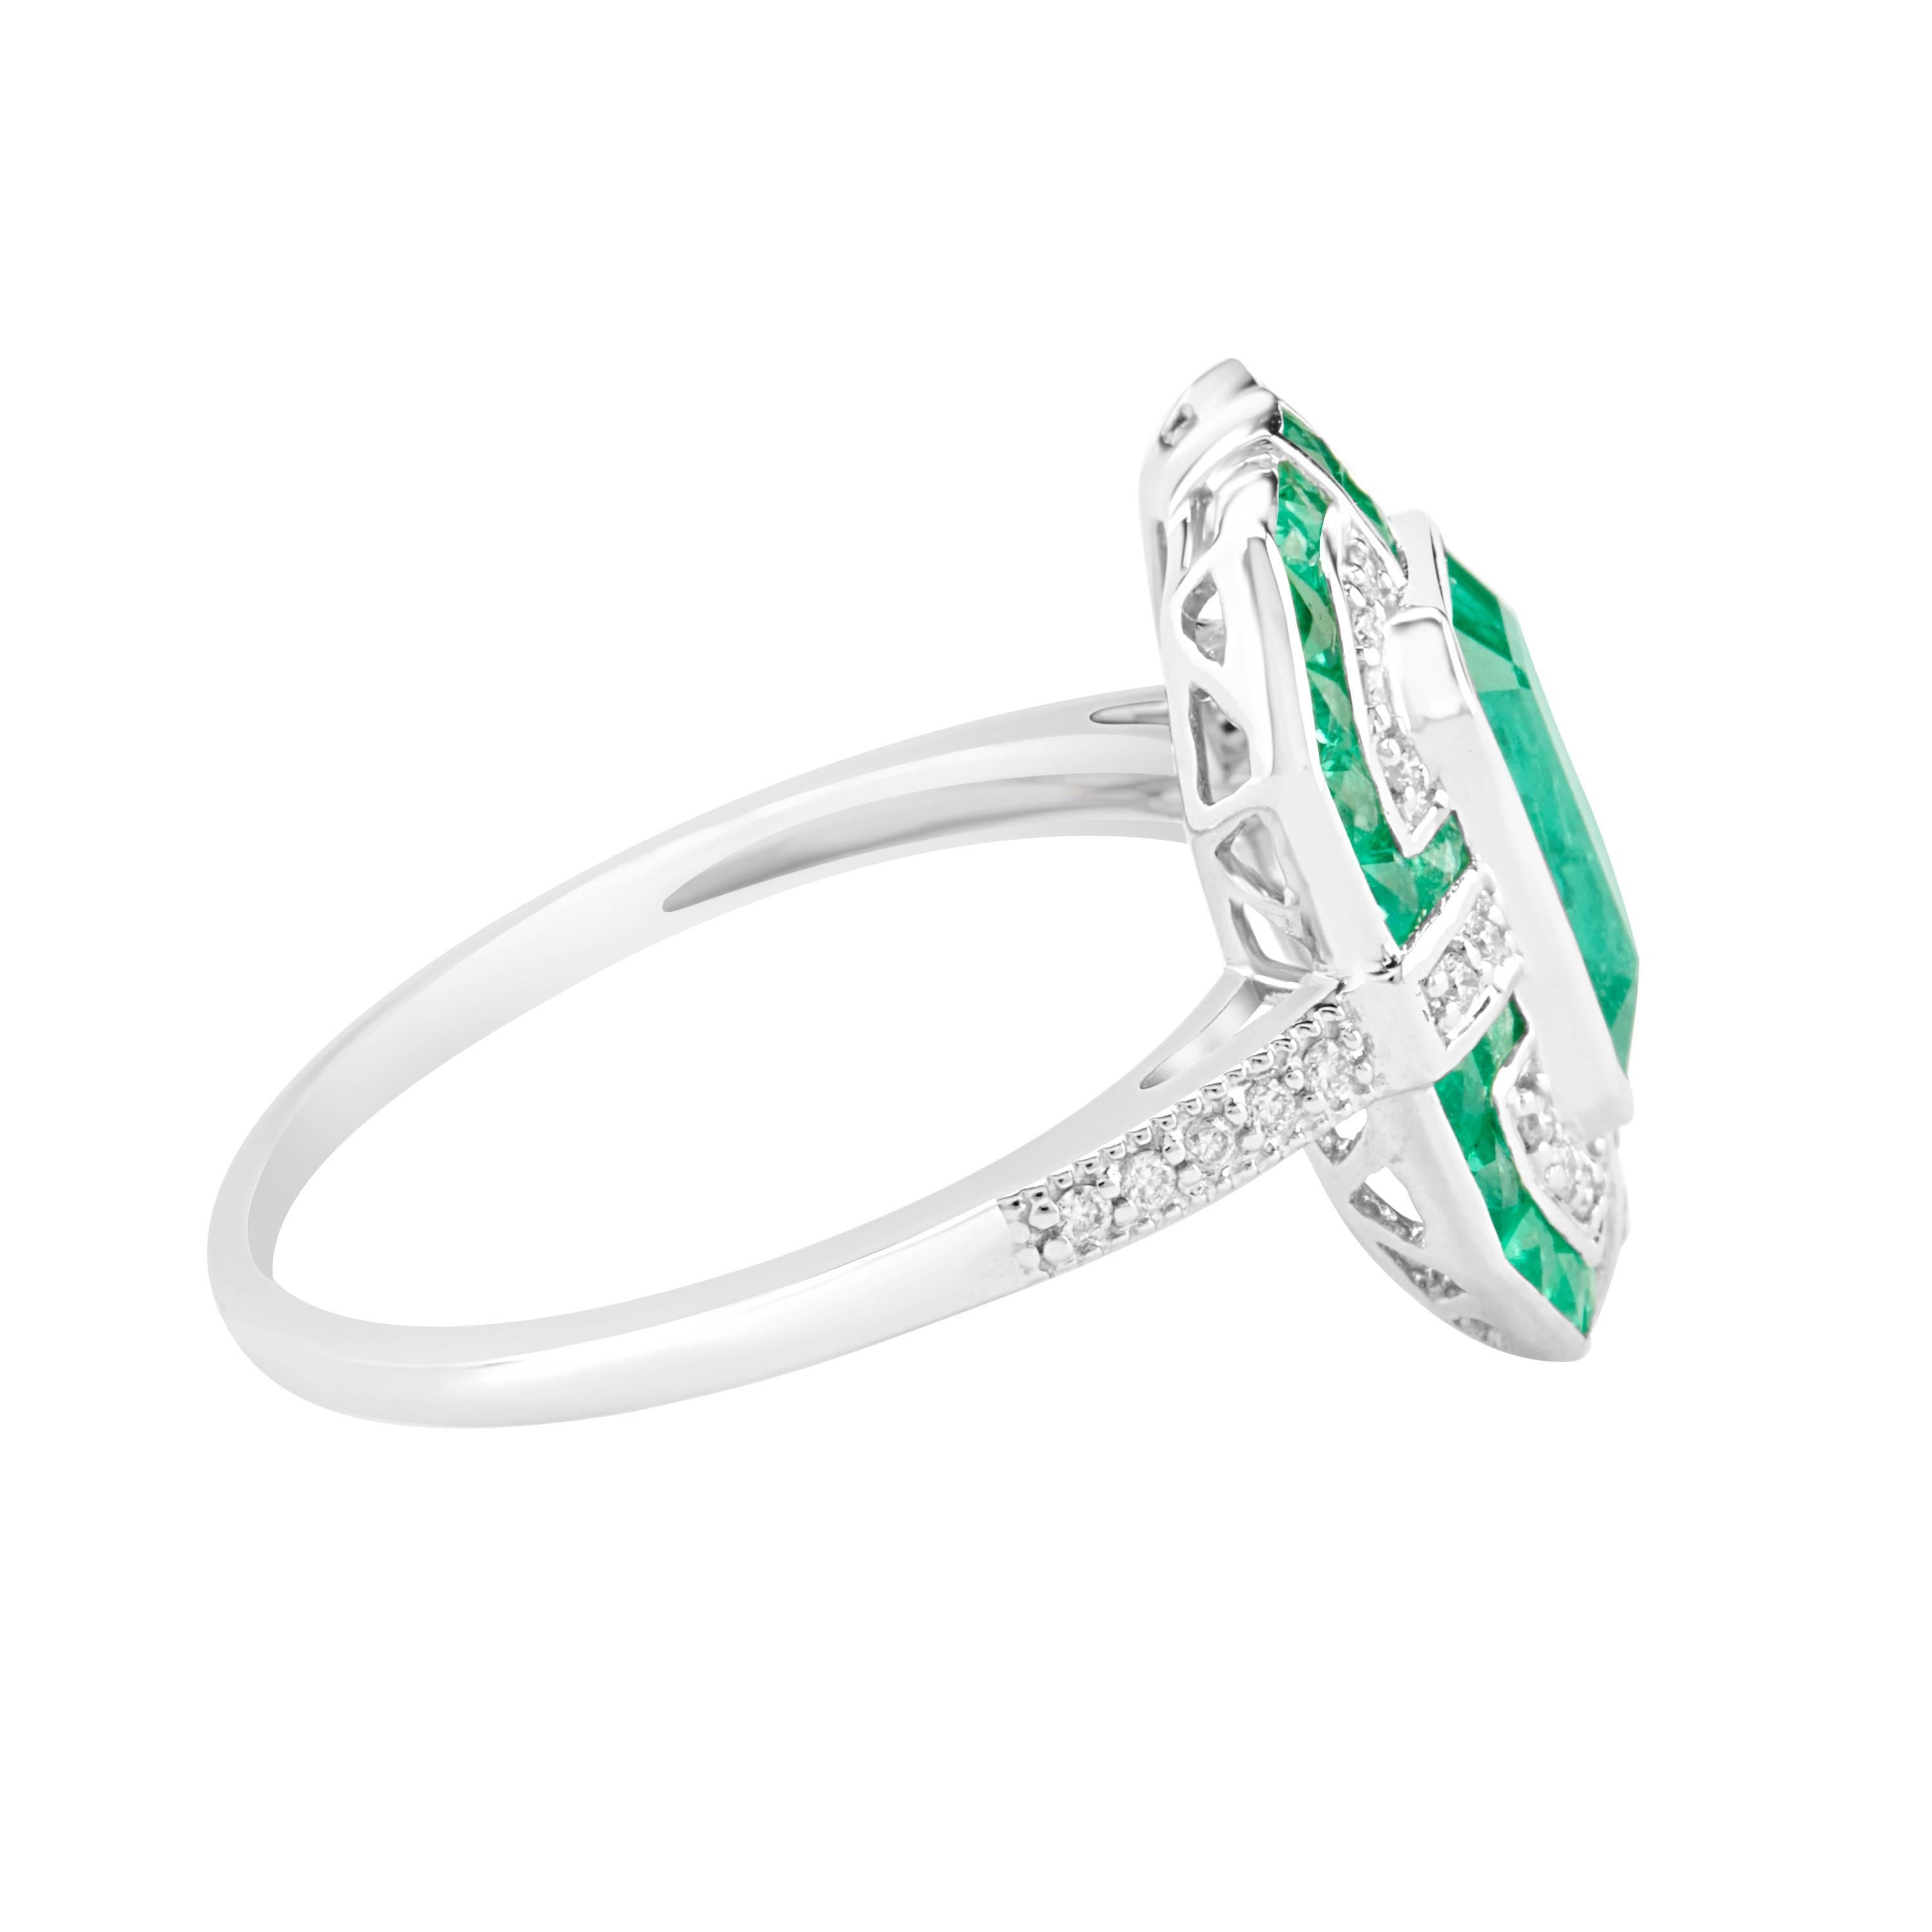 A stunning and impressive Zambian Emerald  and Natural Diamond 18kt gold ring. 
A one-off top pick from our jewelry collections.
Emerald Weight: 2.08 Carats. 
Diamond weight: 0.15 Carats.
All stones are VS-SI in clarity and are GH in colour.
GIL